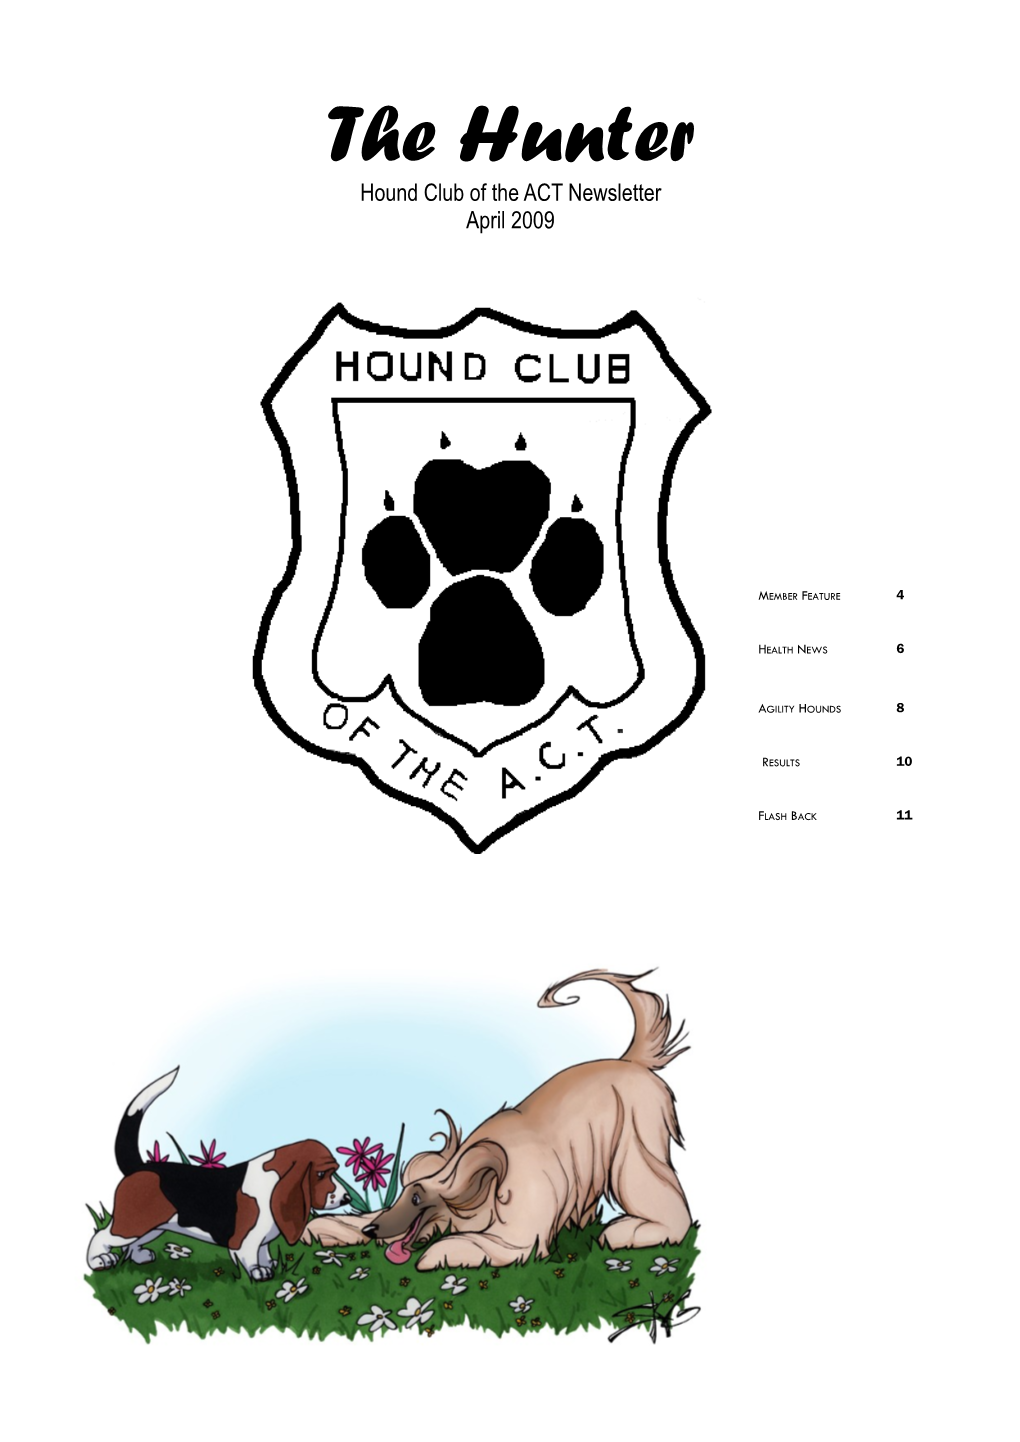 The Hunter Hound Club of the ACT Newsletter April 2009